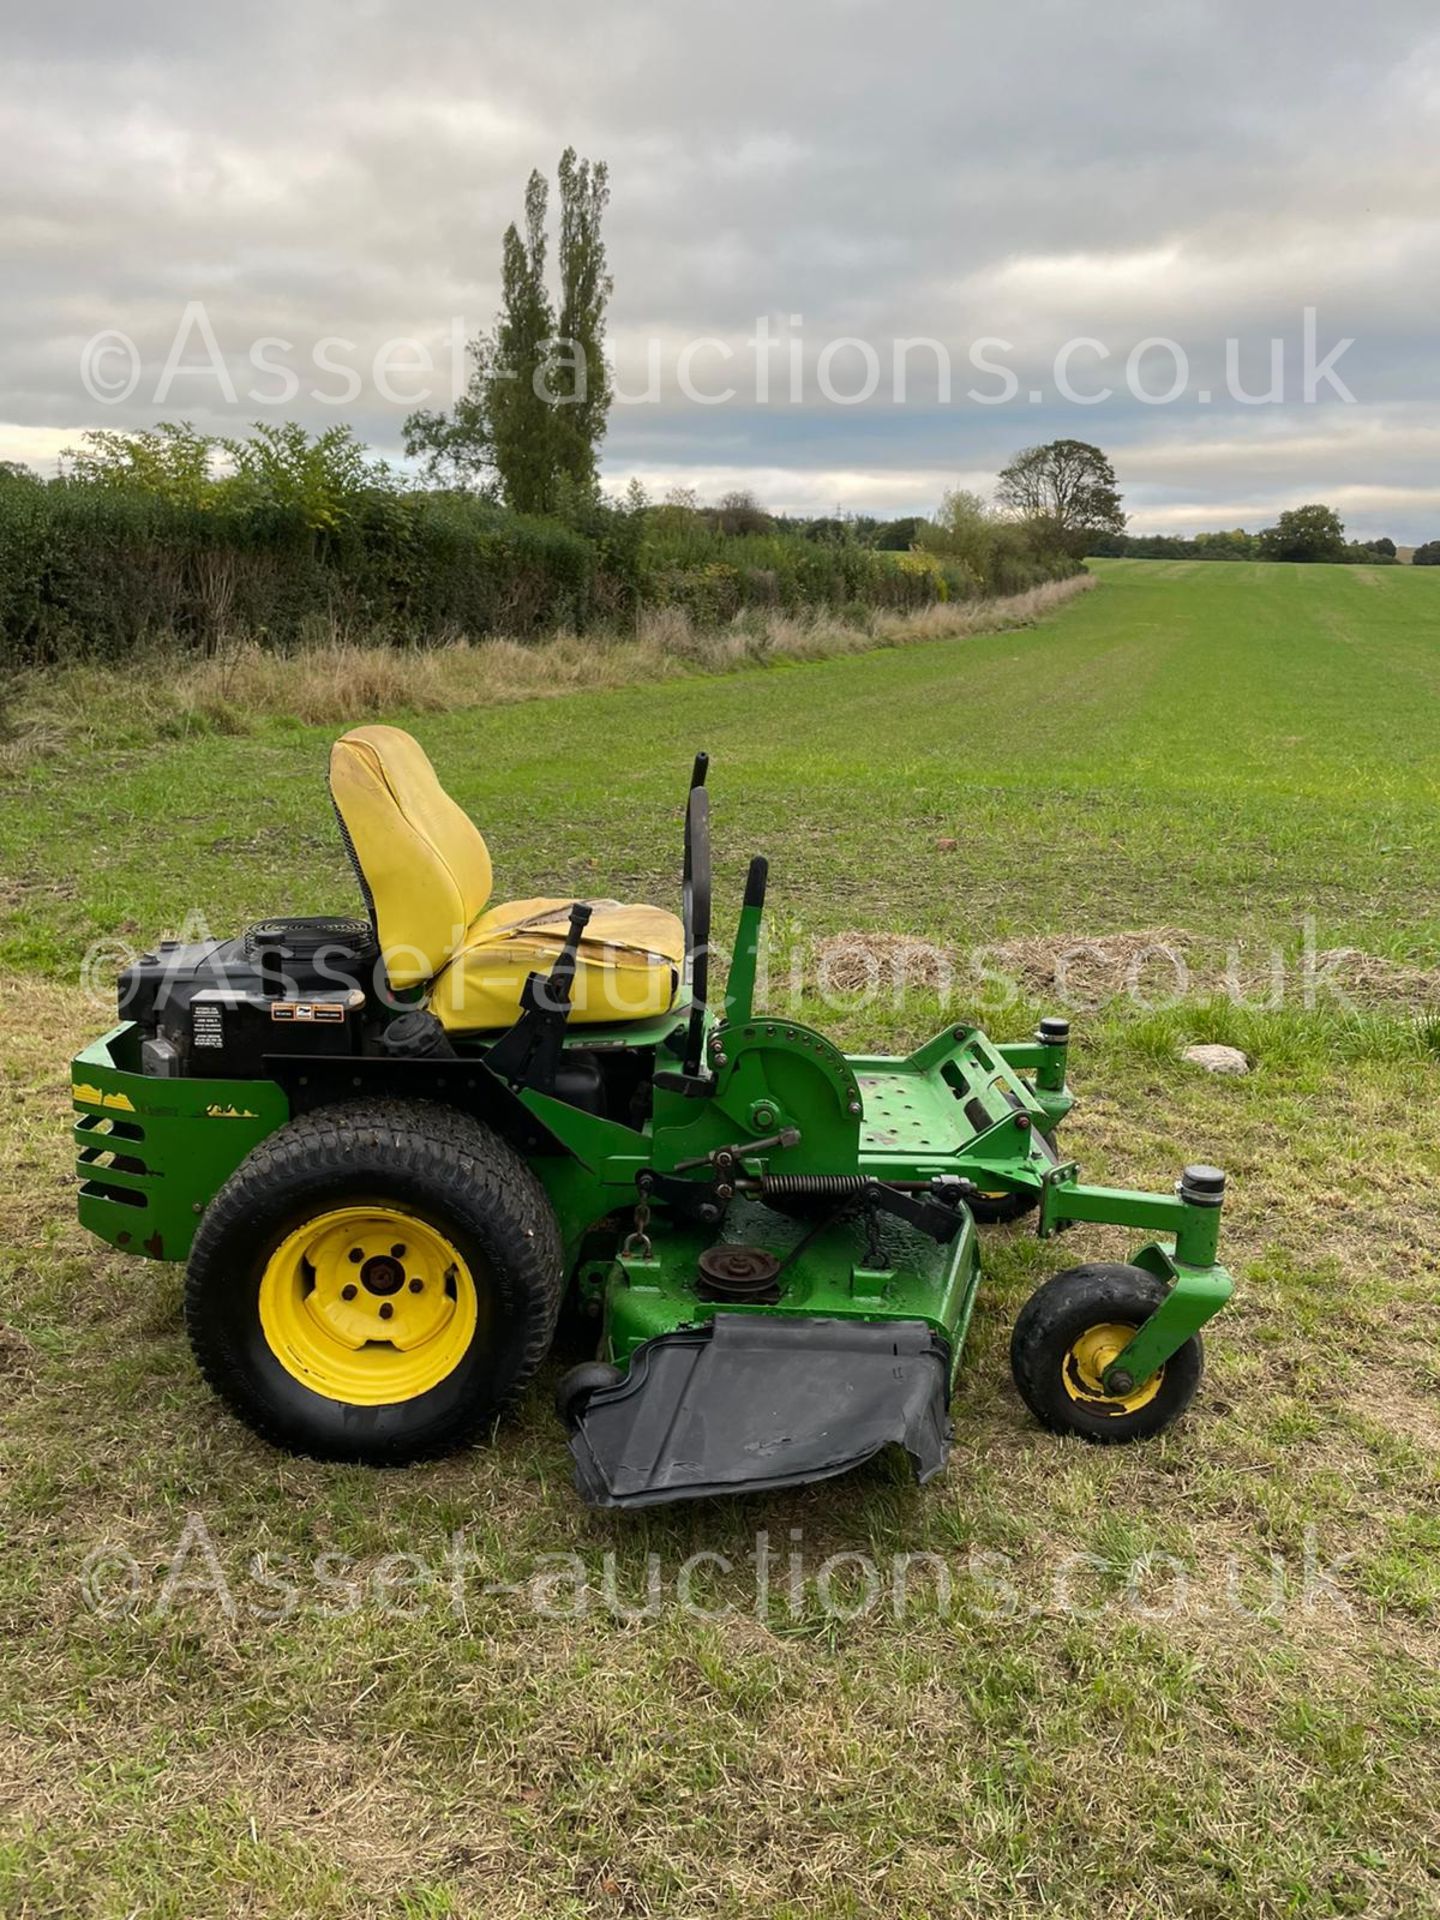 JOHN DEERE 717 Z-TRAK ZERO TURN RIDE ON LAWN MOWER, RUNS DRIVES AND CUTS, SHOWING A LOW 336 HOURS - Image 15 of 18